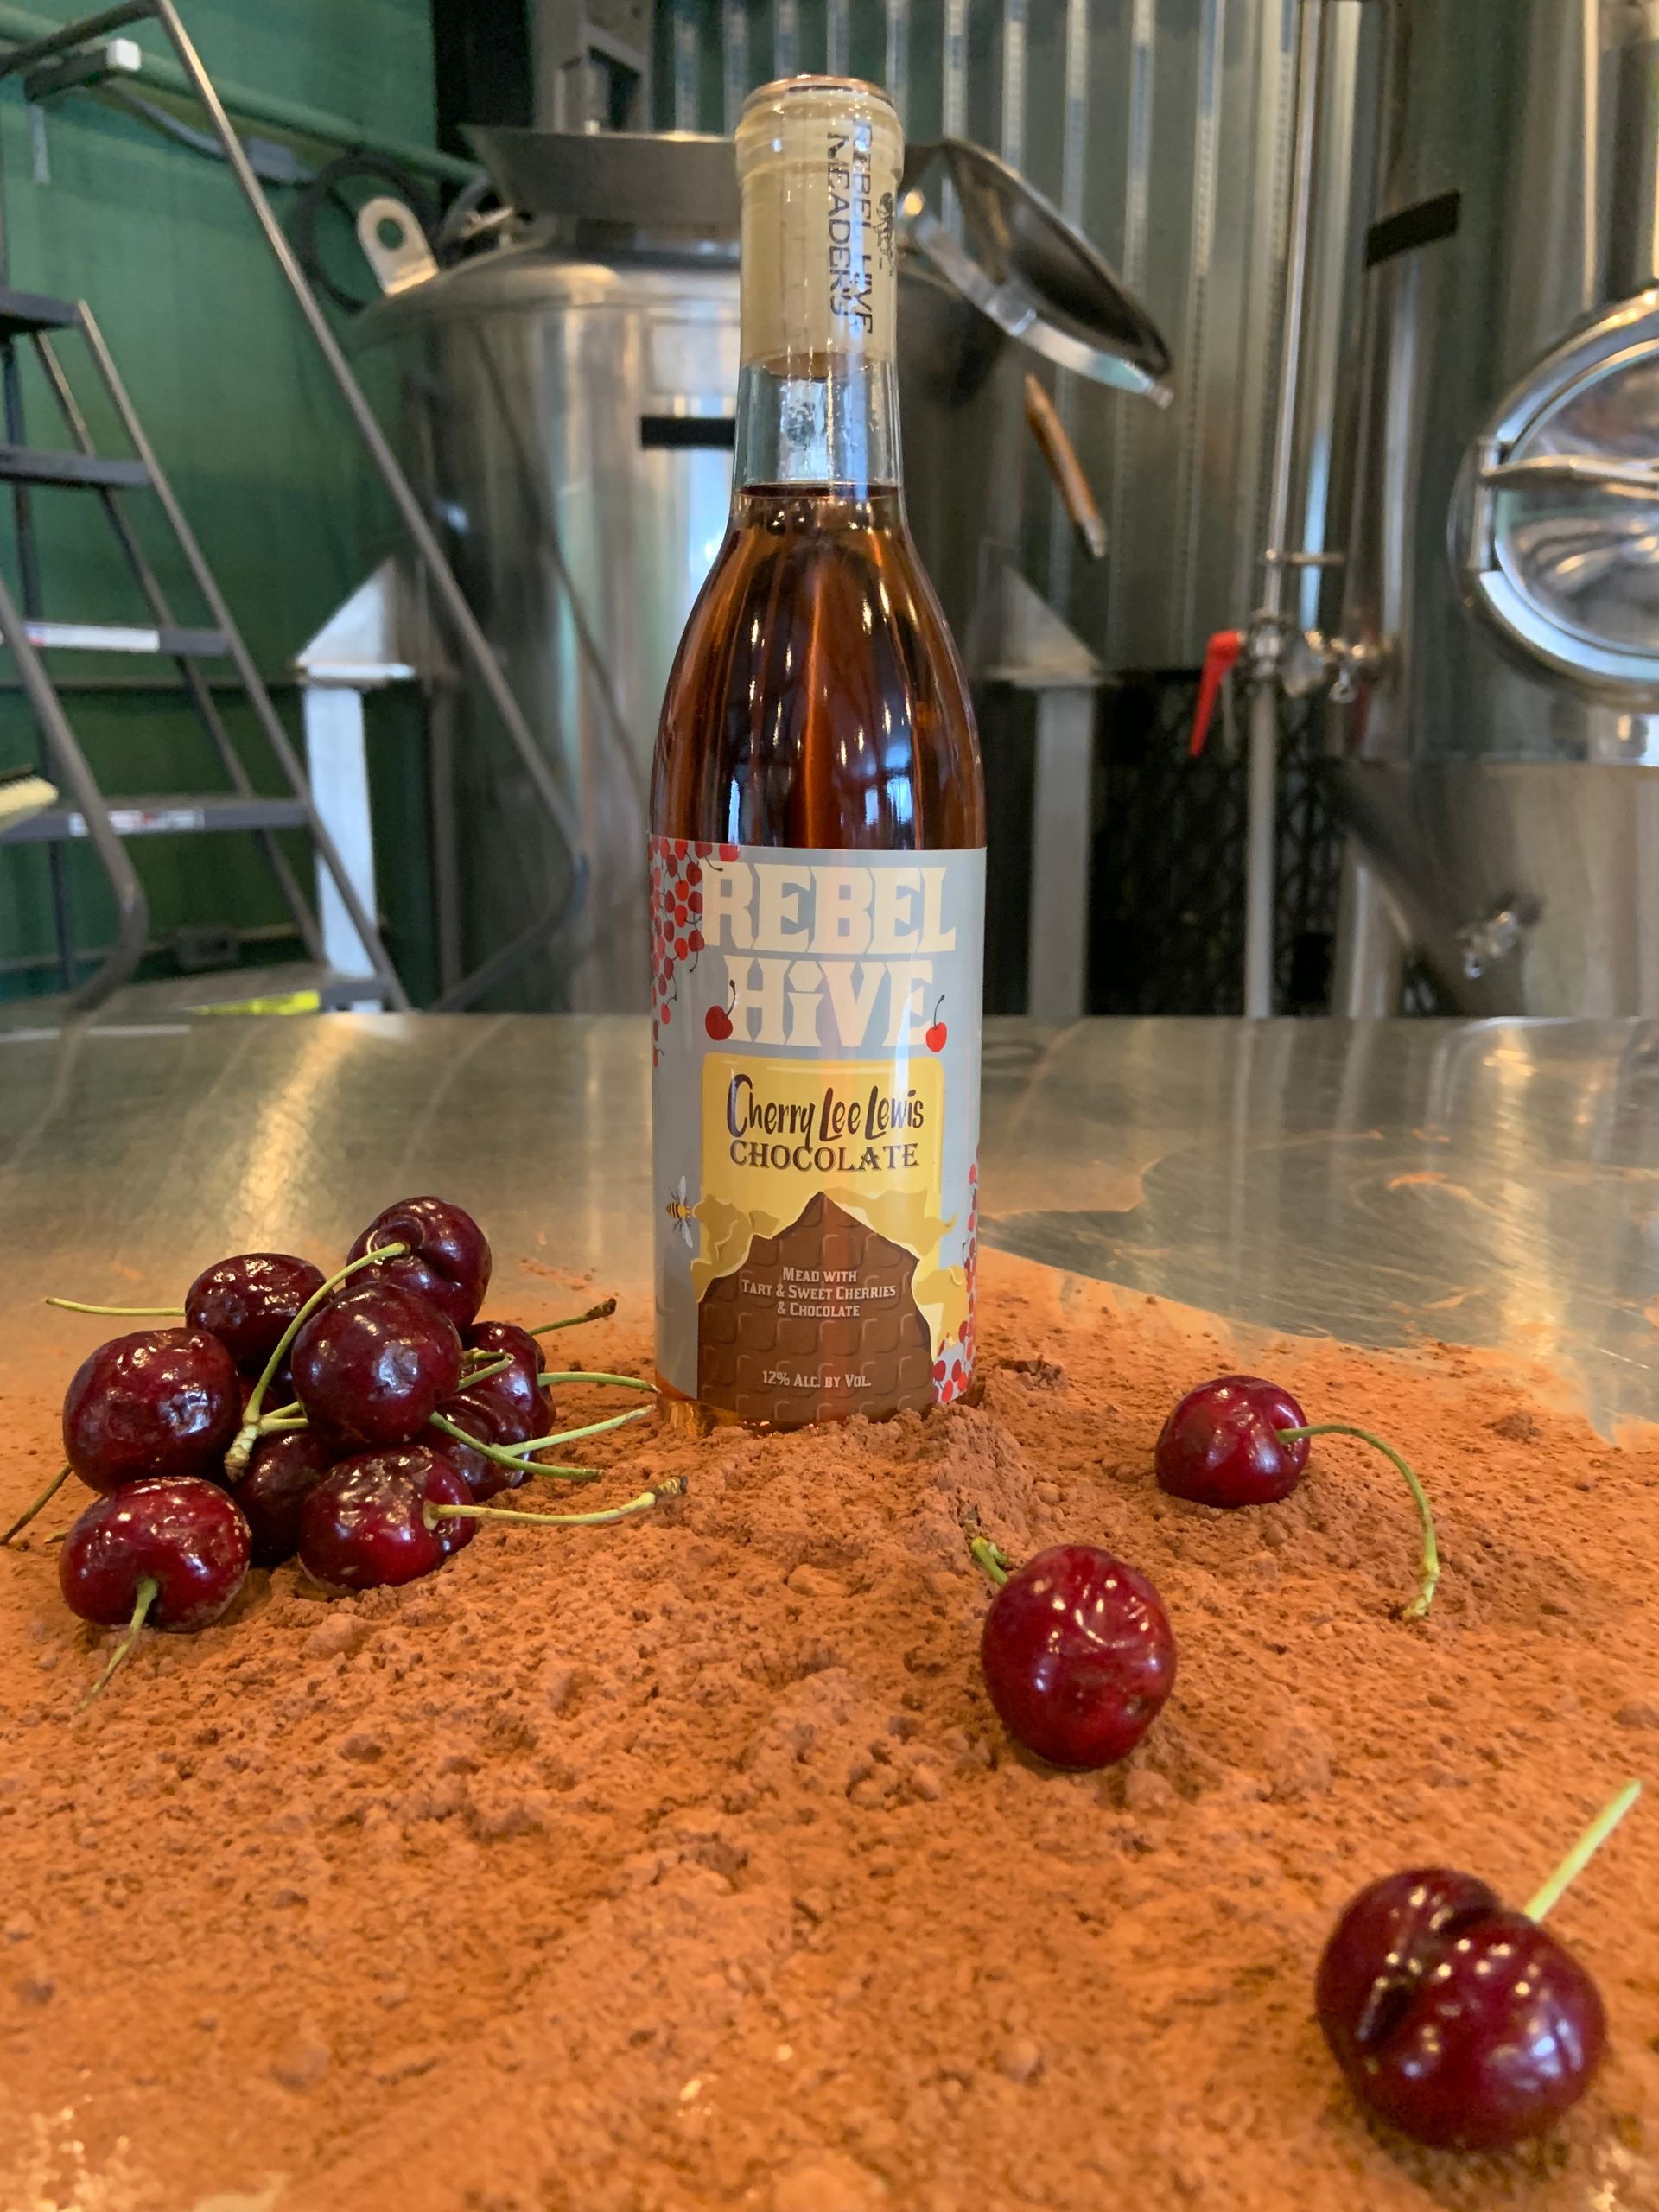 Cherry Lee Lewis Chocolate, new mead release made with tart cherries, sweet cherries, and Hershey cocoa powder